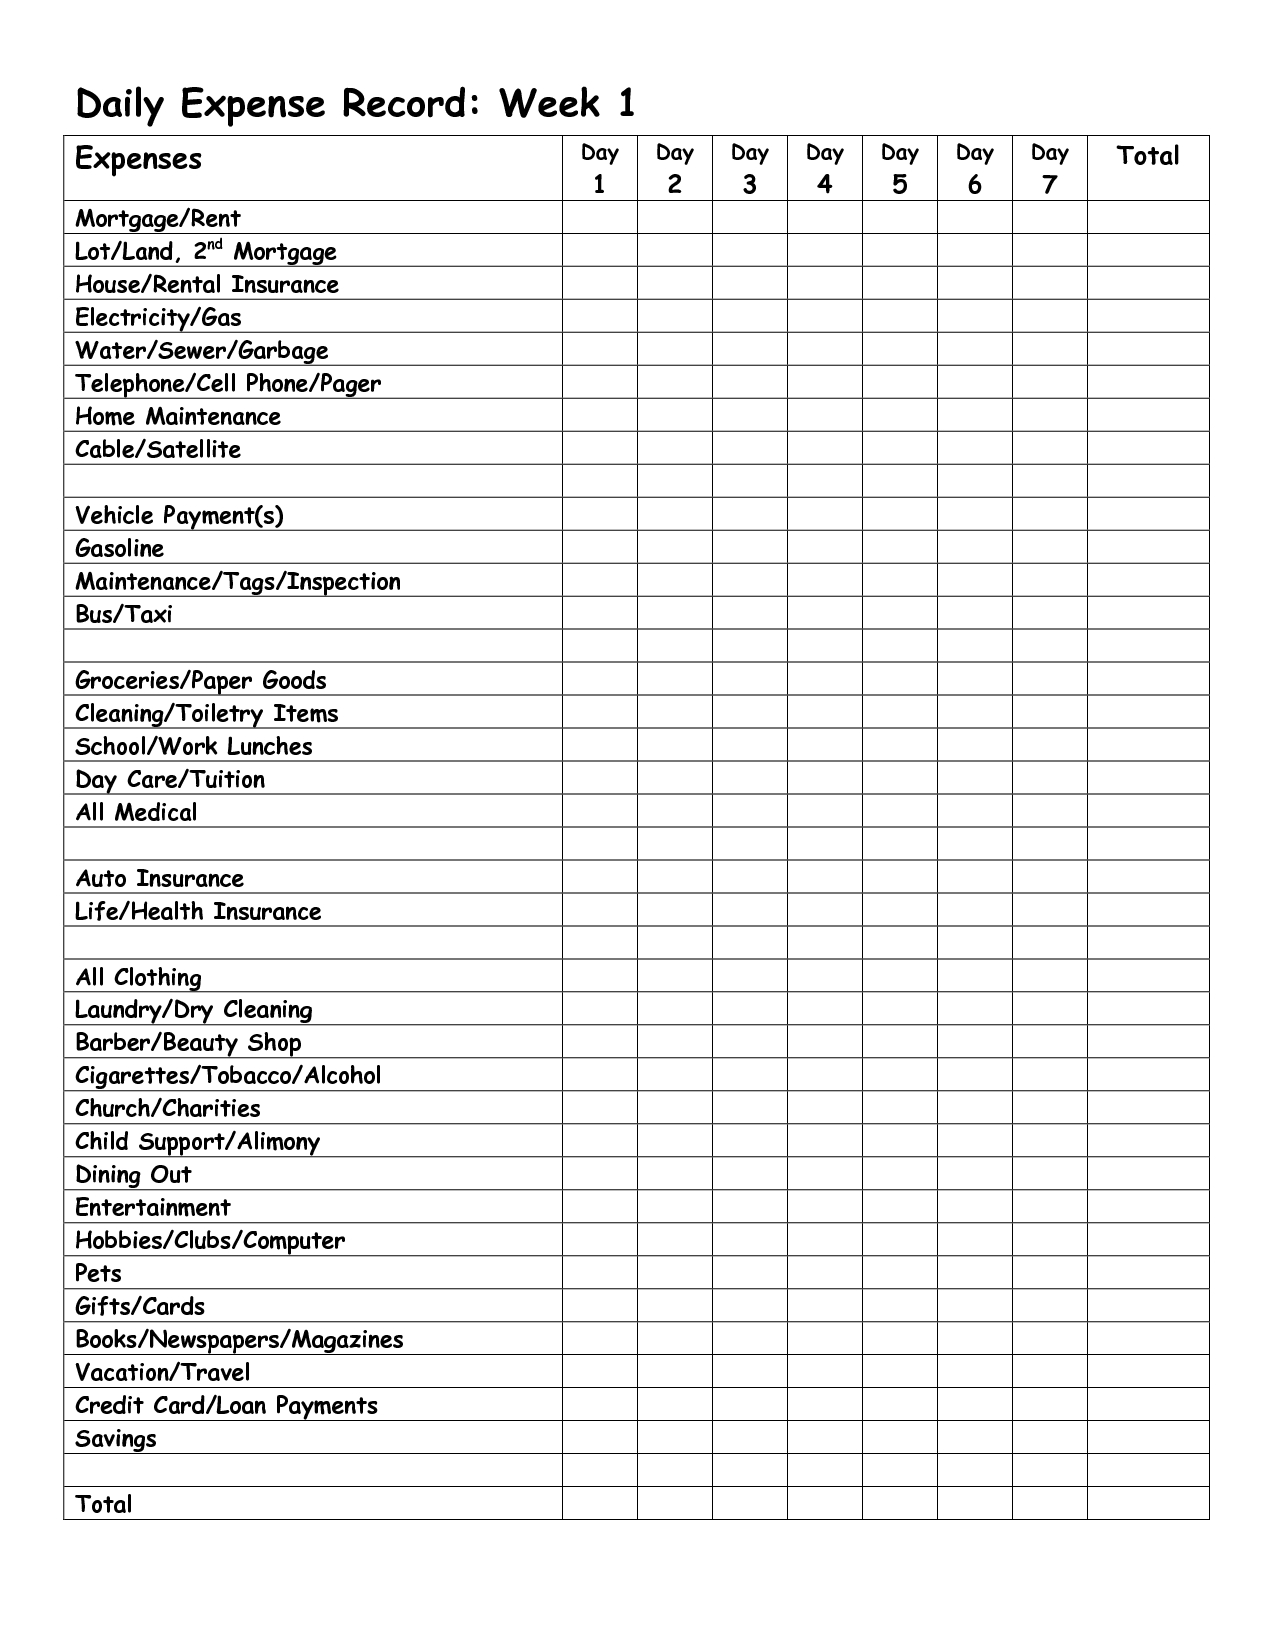 Monthly Expense Report Template | Daily Expense Record Week 1 - Free Printable Monthly Expense Sheet